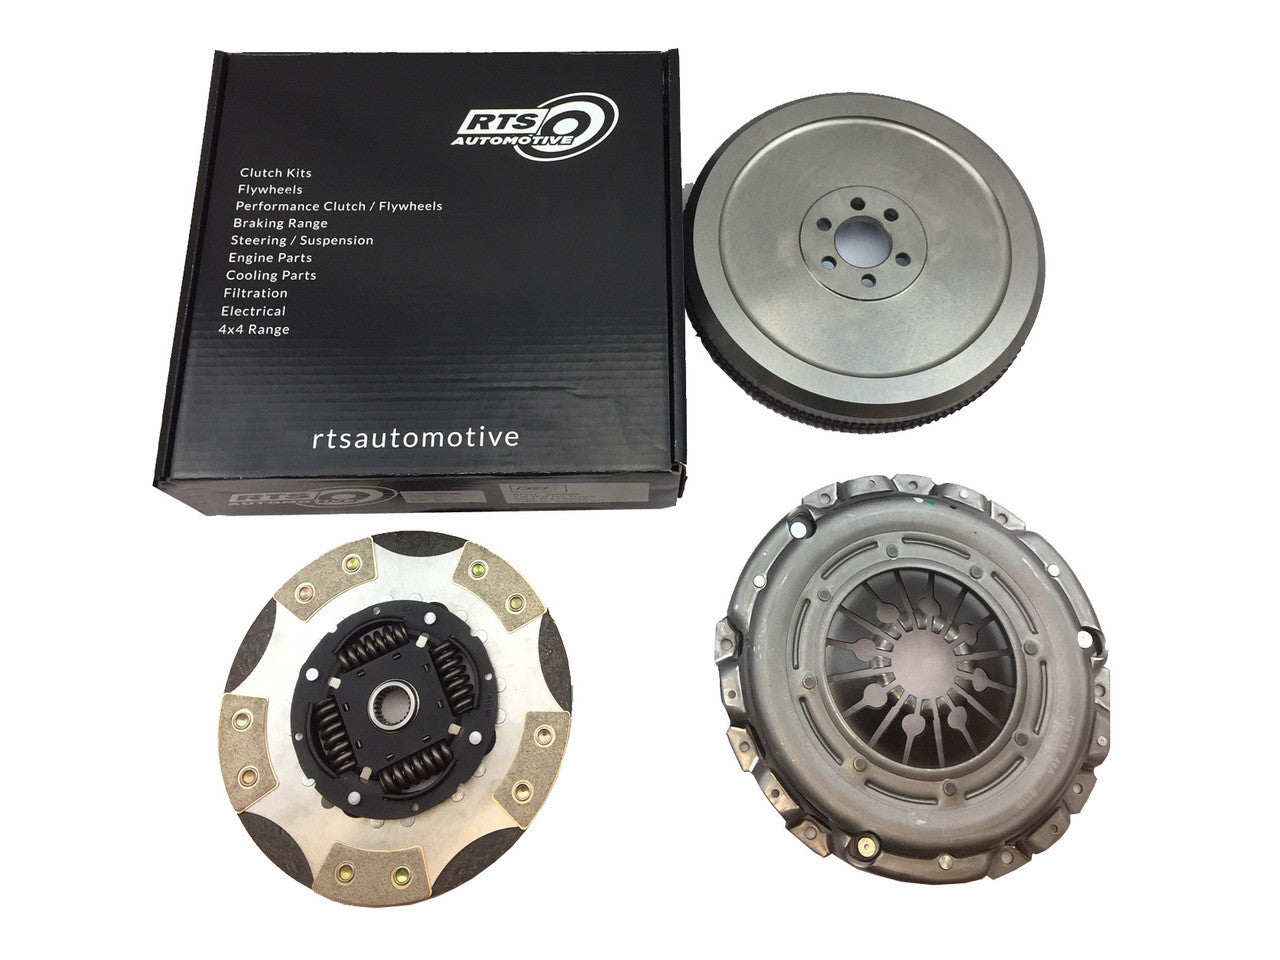 RTS Performance Clutch - SMF & Twin-Friction Clutch Kit for 2.0TFSI EA113